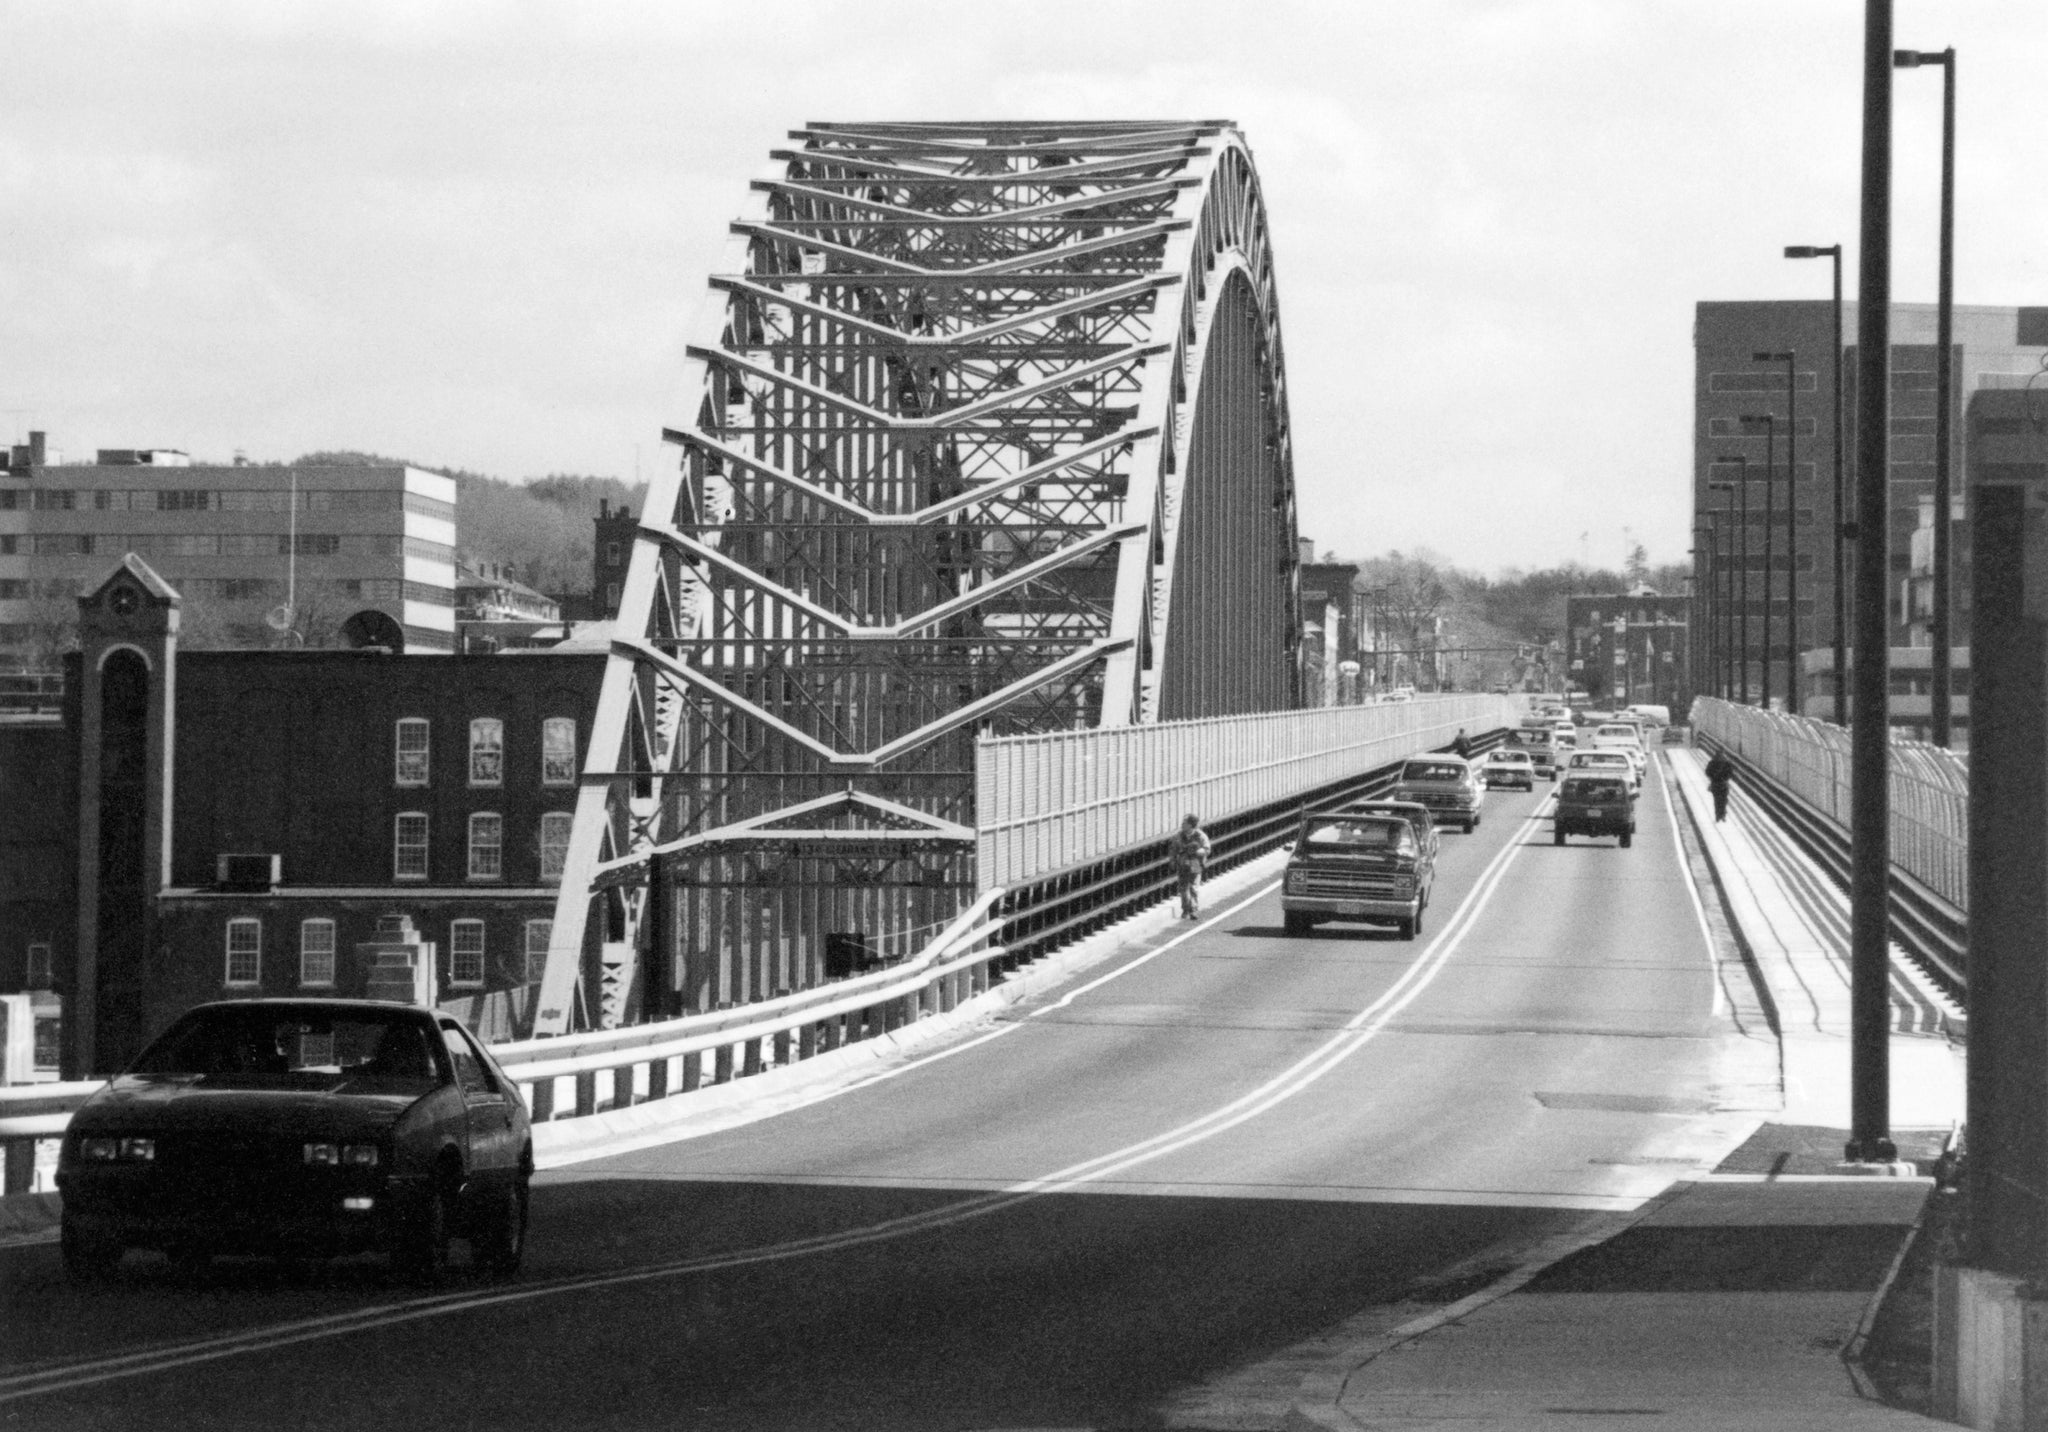 The “old and new” Notre Dame Bridge, 1989. The photo was taken in April 1989, just before the demolition of the old arched bridge. -- Courtesy David Laliberté